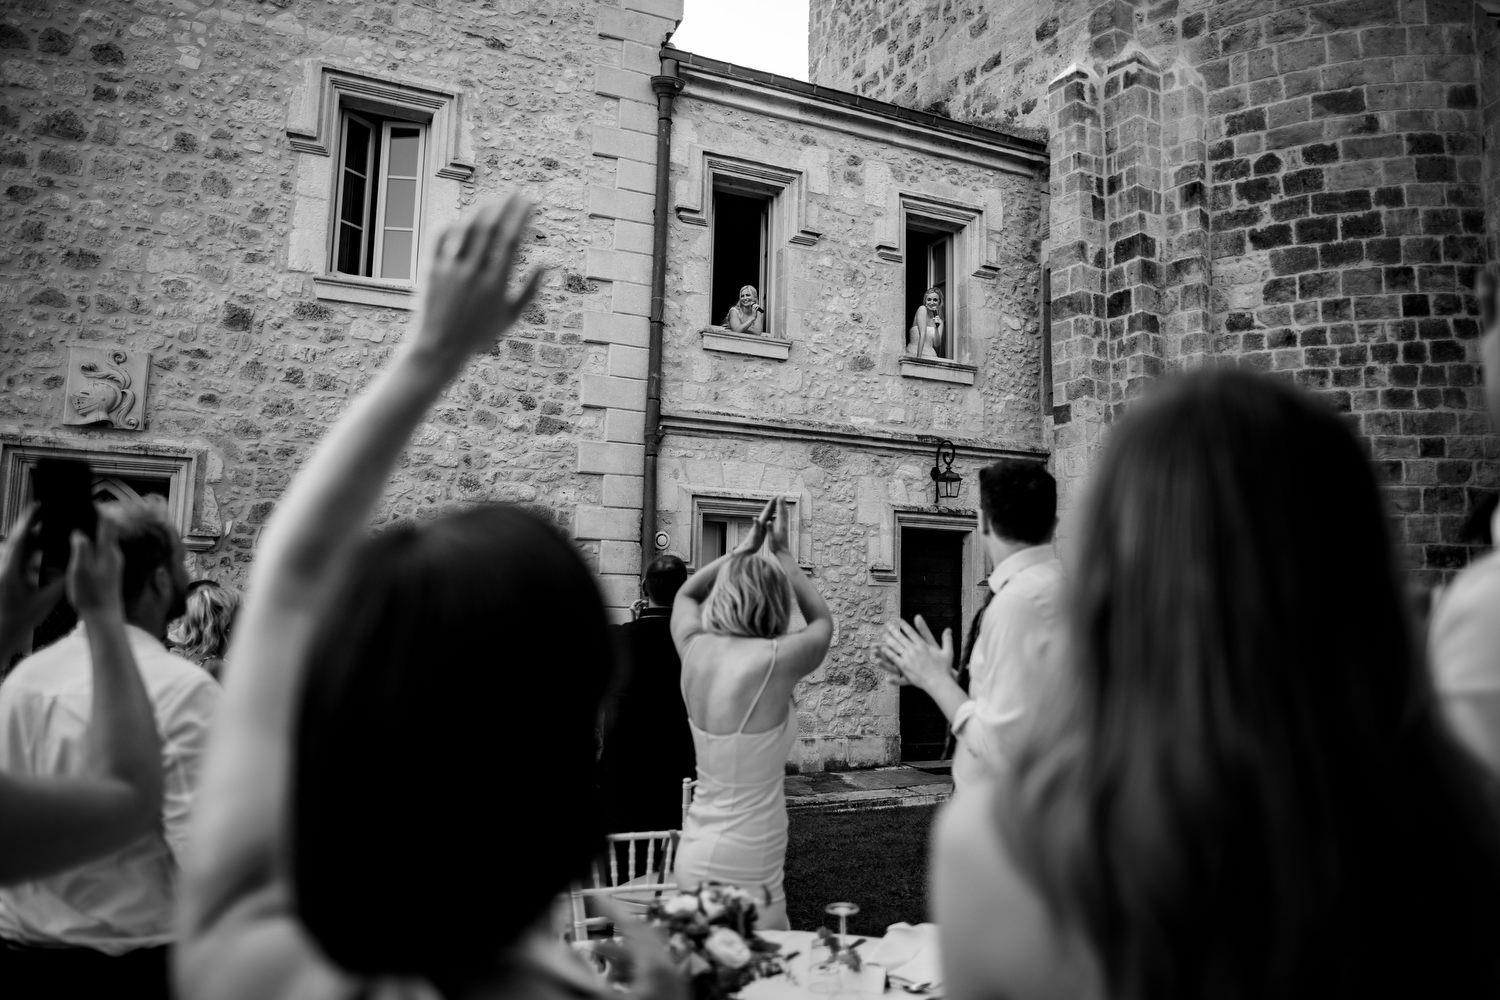 brides sing song guests from chateau balcony at wedding in France